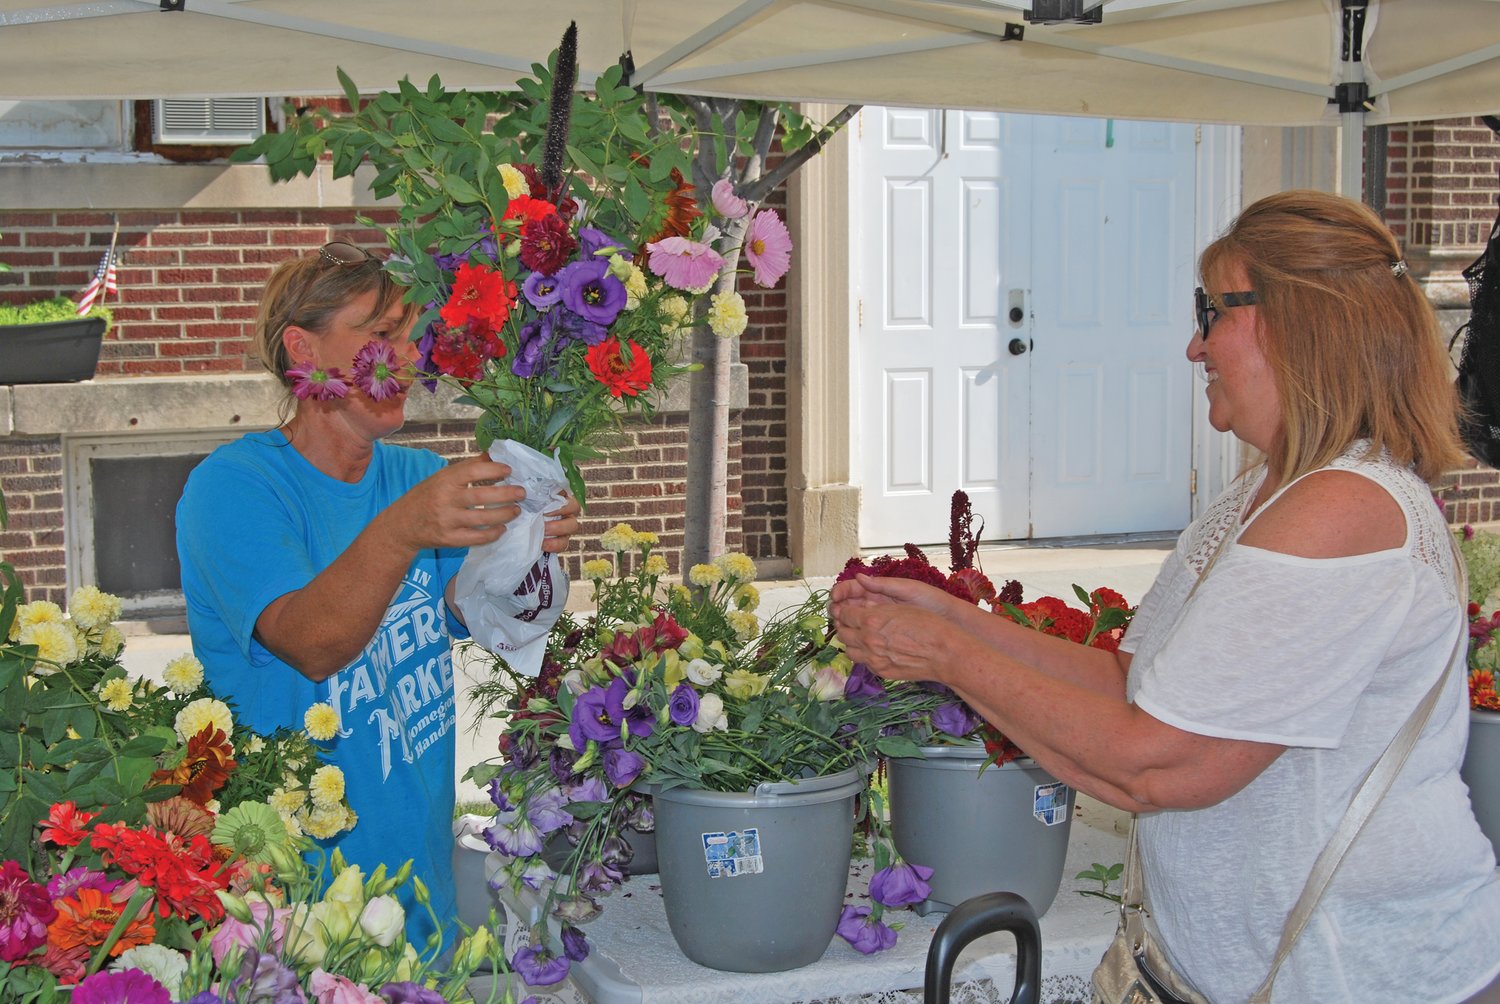 Jamie Smith of Fall Creek Farm hands a flower bouquet to Vickie Lingen at the Crawfordsville Farmers Market Saturday.